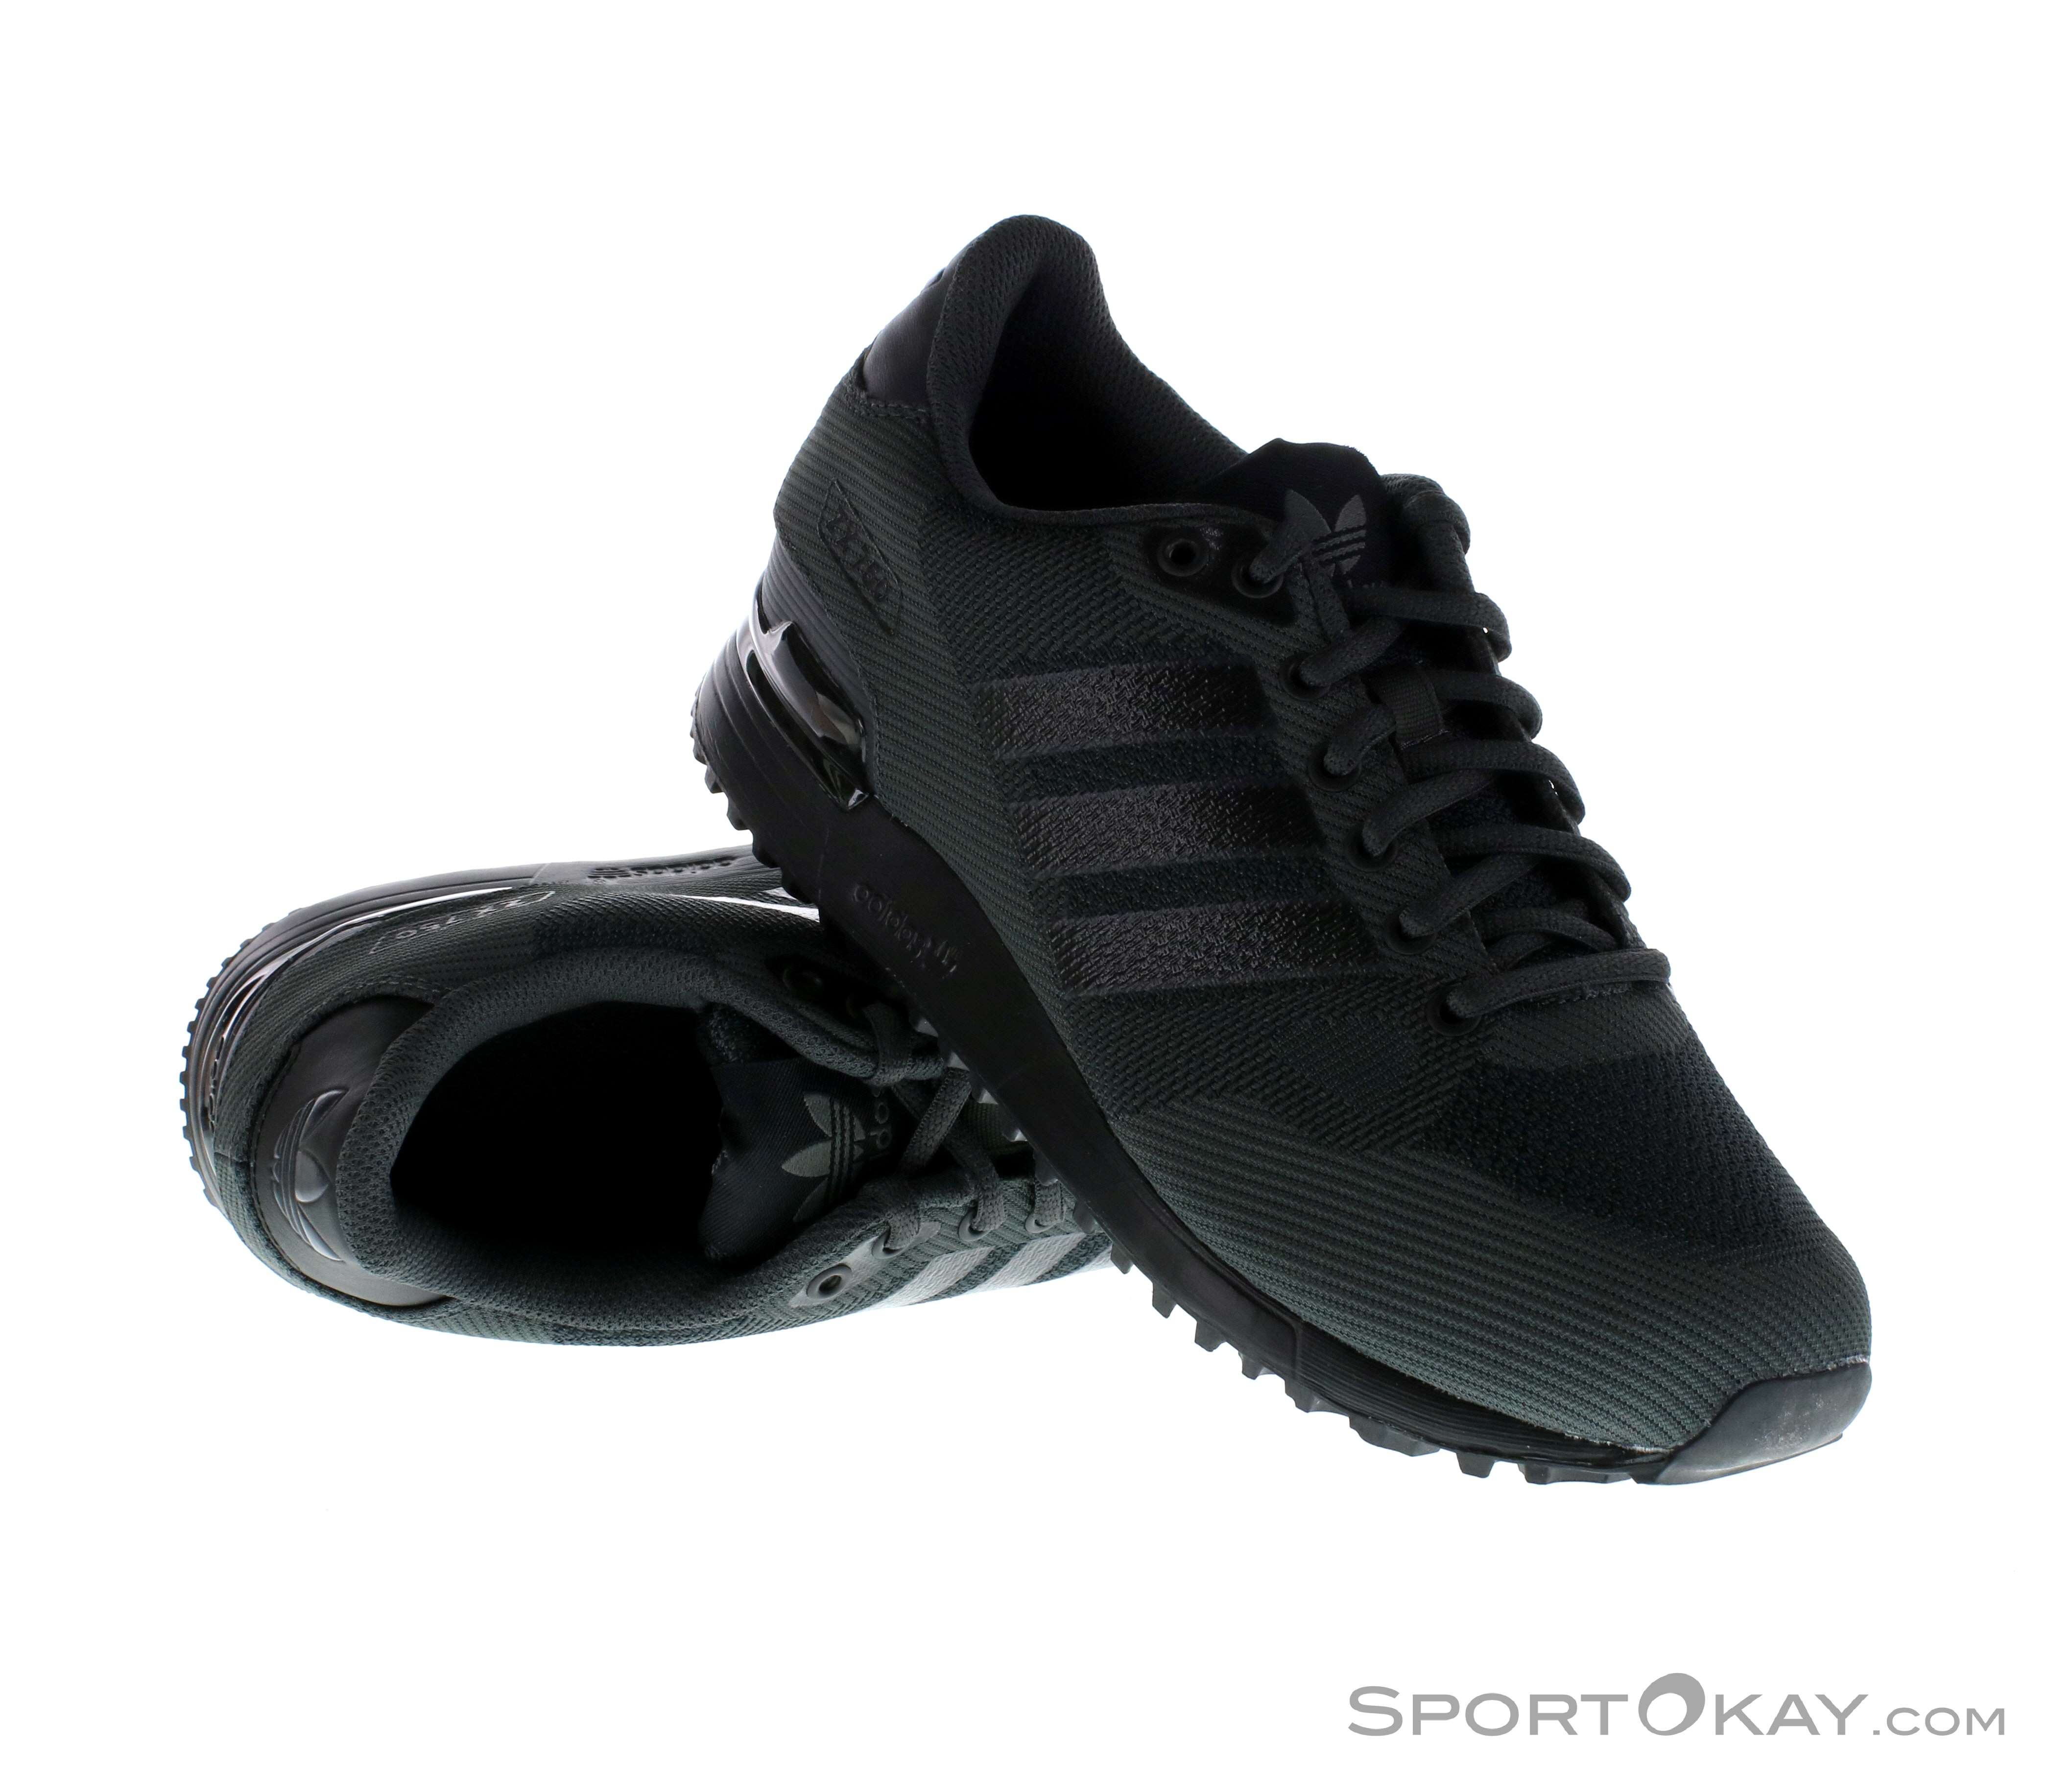 Adidas ZX 750 WV Leisure Shoes - Leisure Shoes - Shoes & Poles - Outdoor - All